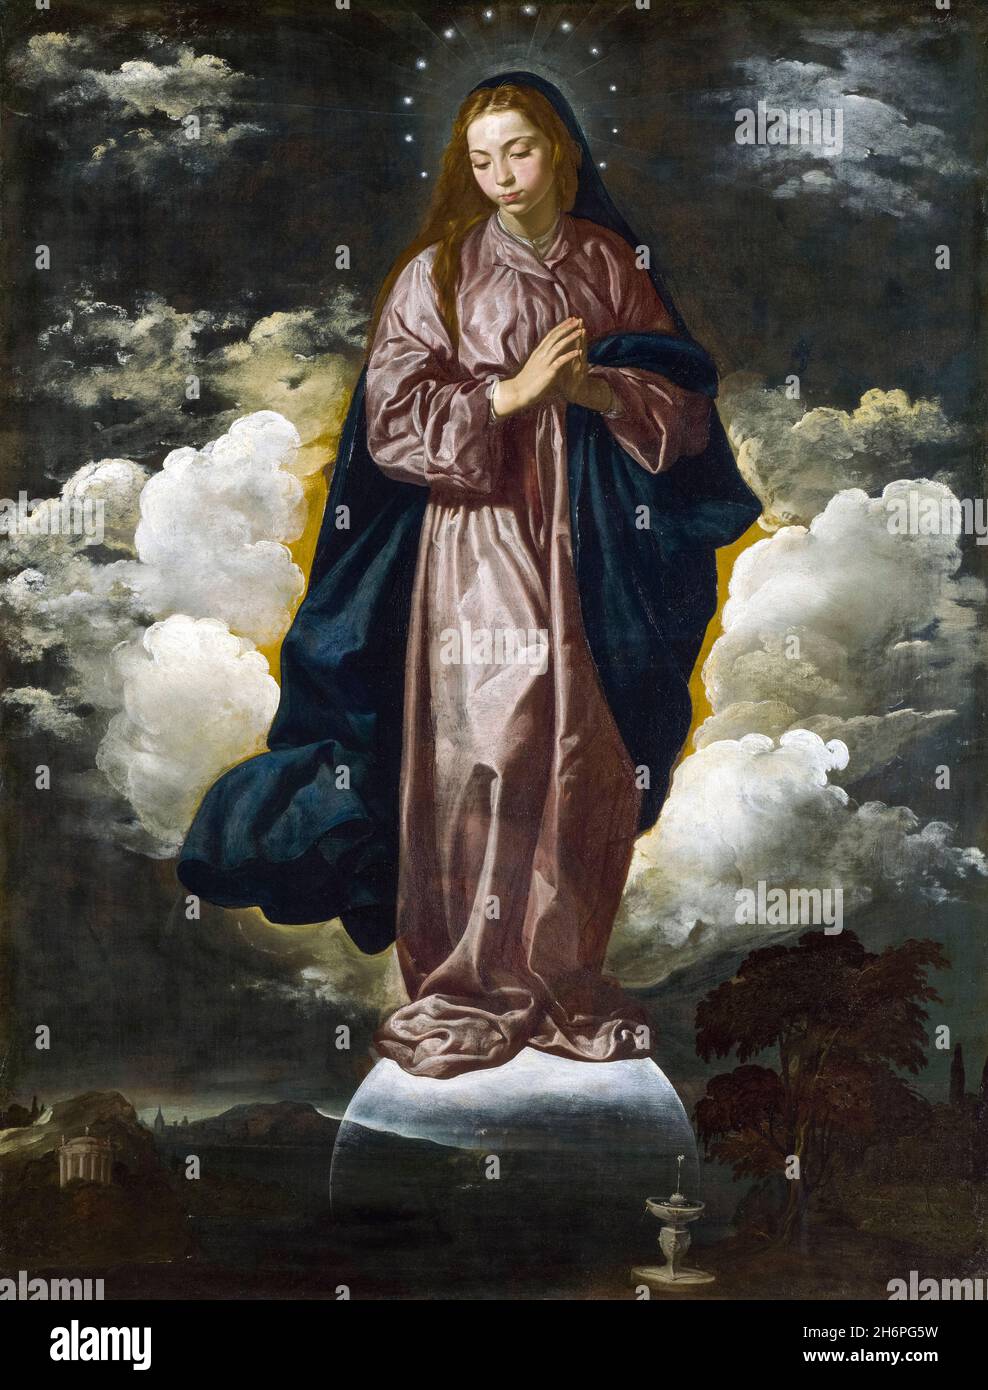 The Immaculate Conception, painting by Diego Velazquez, 1618 Stock Photo